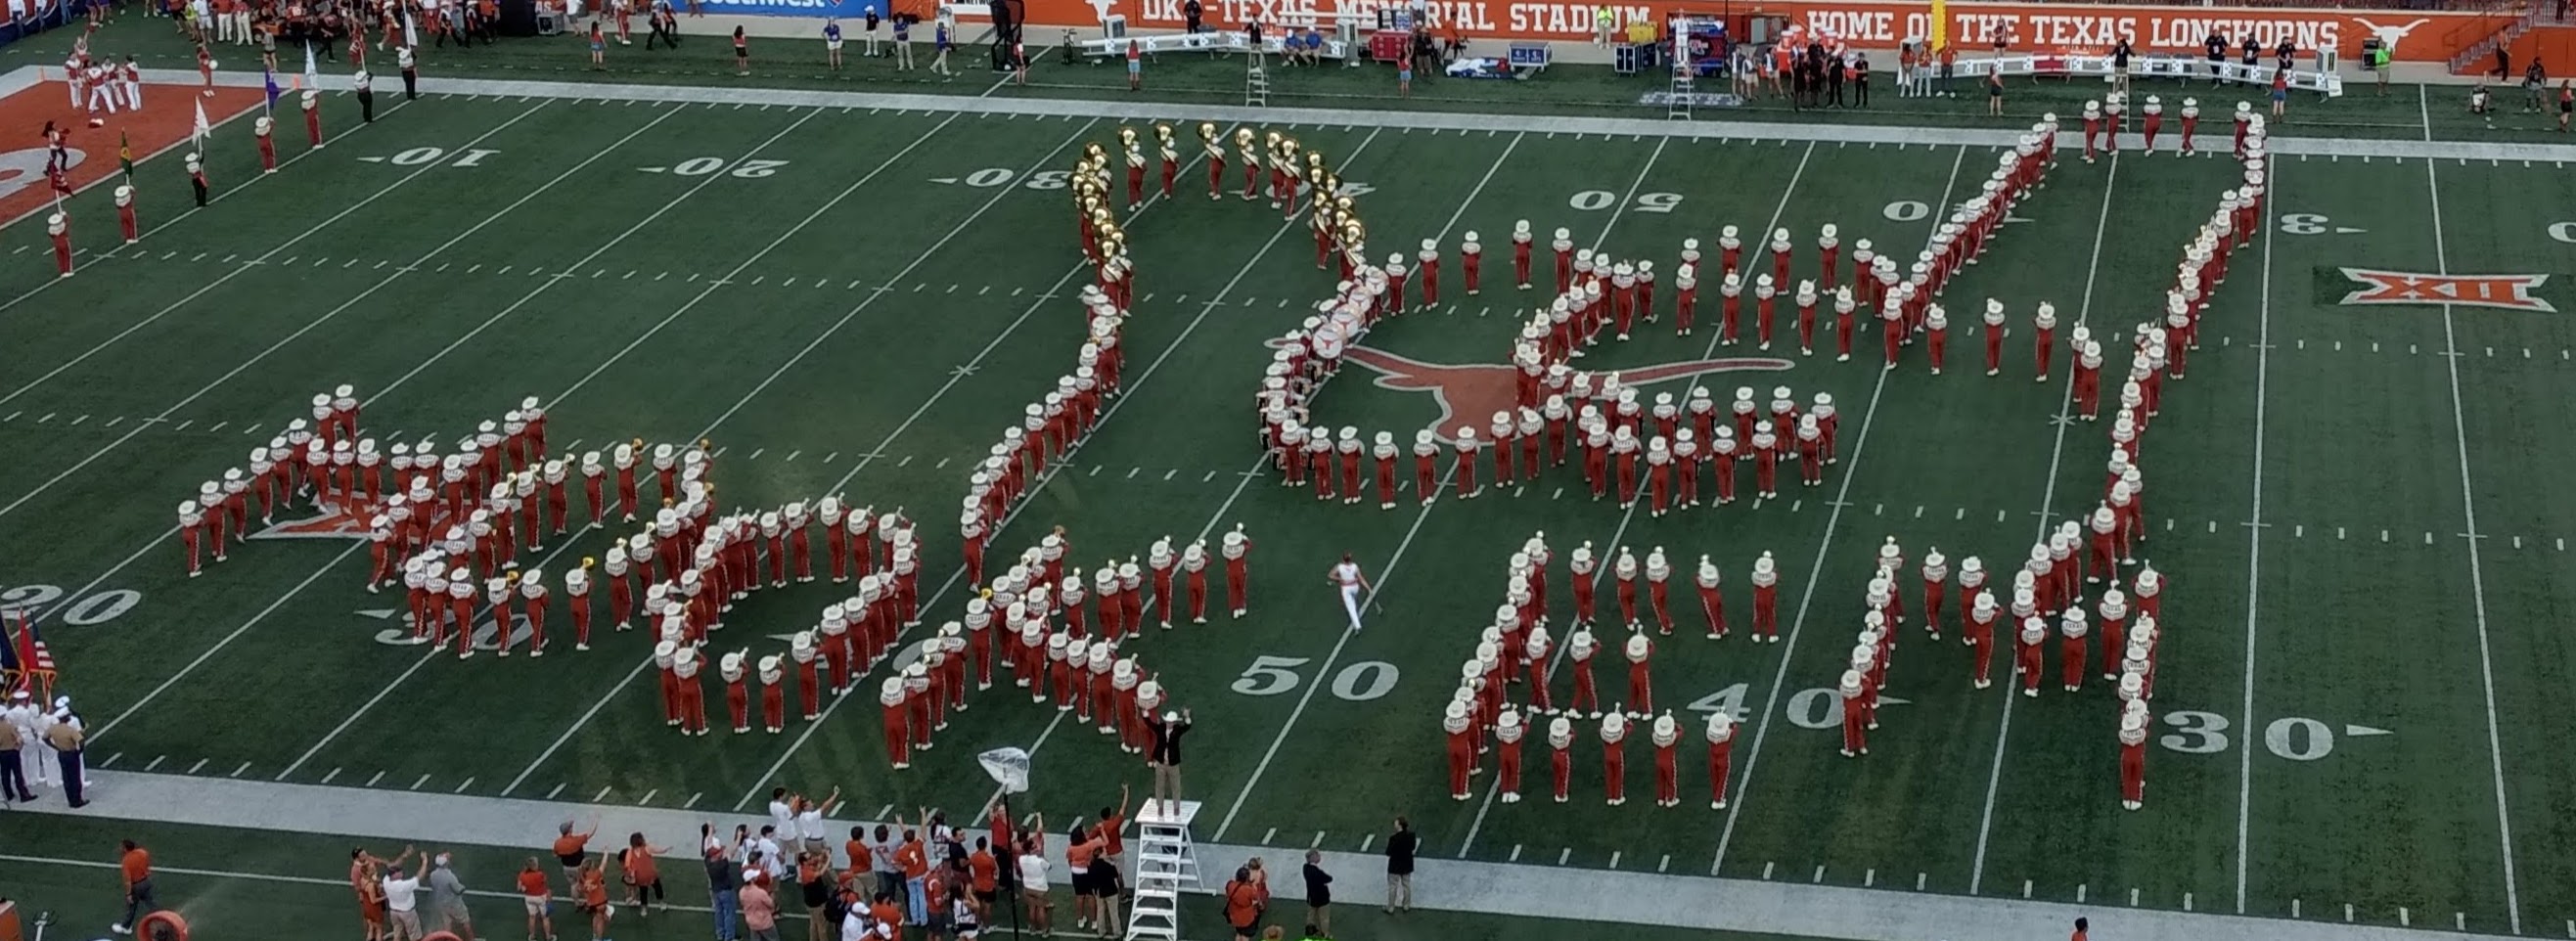 Longhorn band spelling out Hook 'em with fingers in horns up.